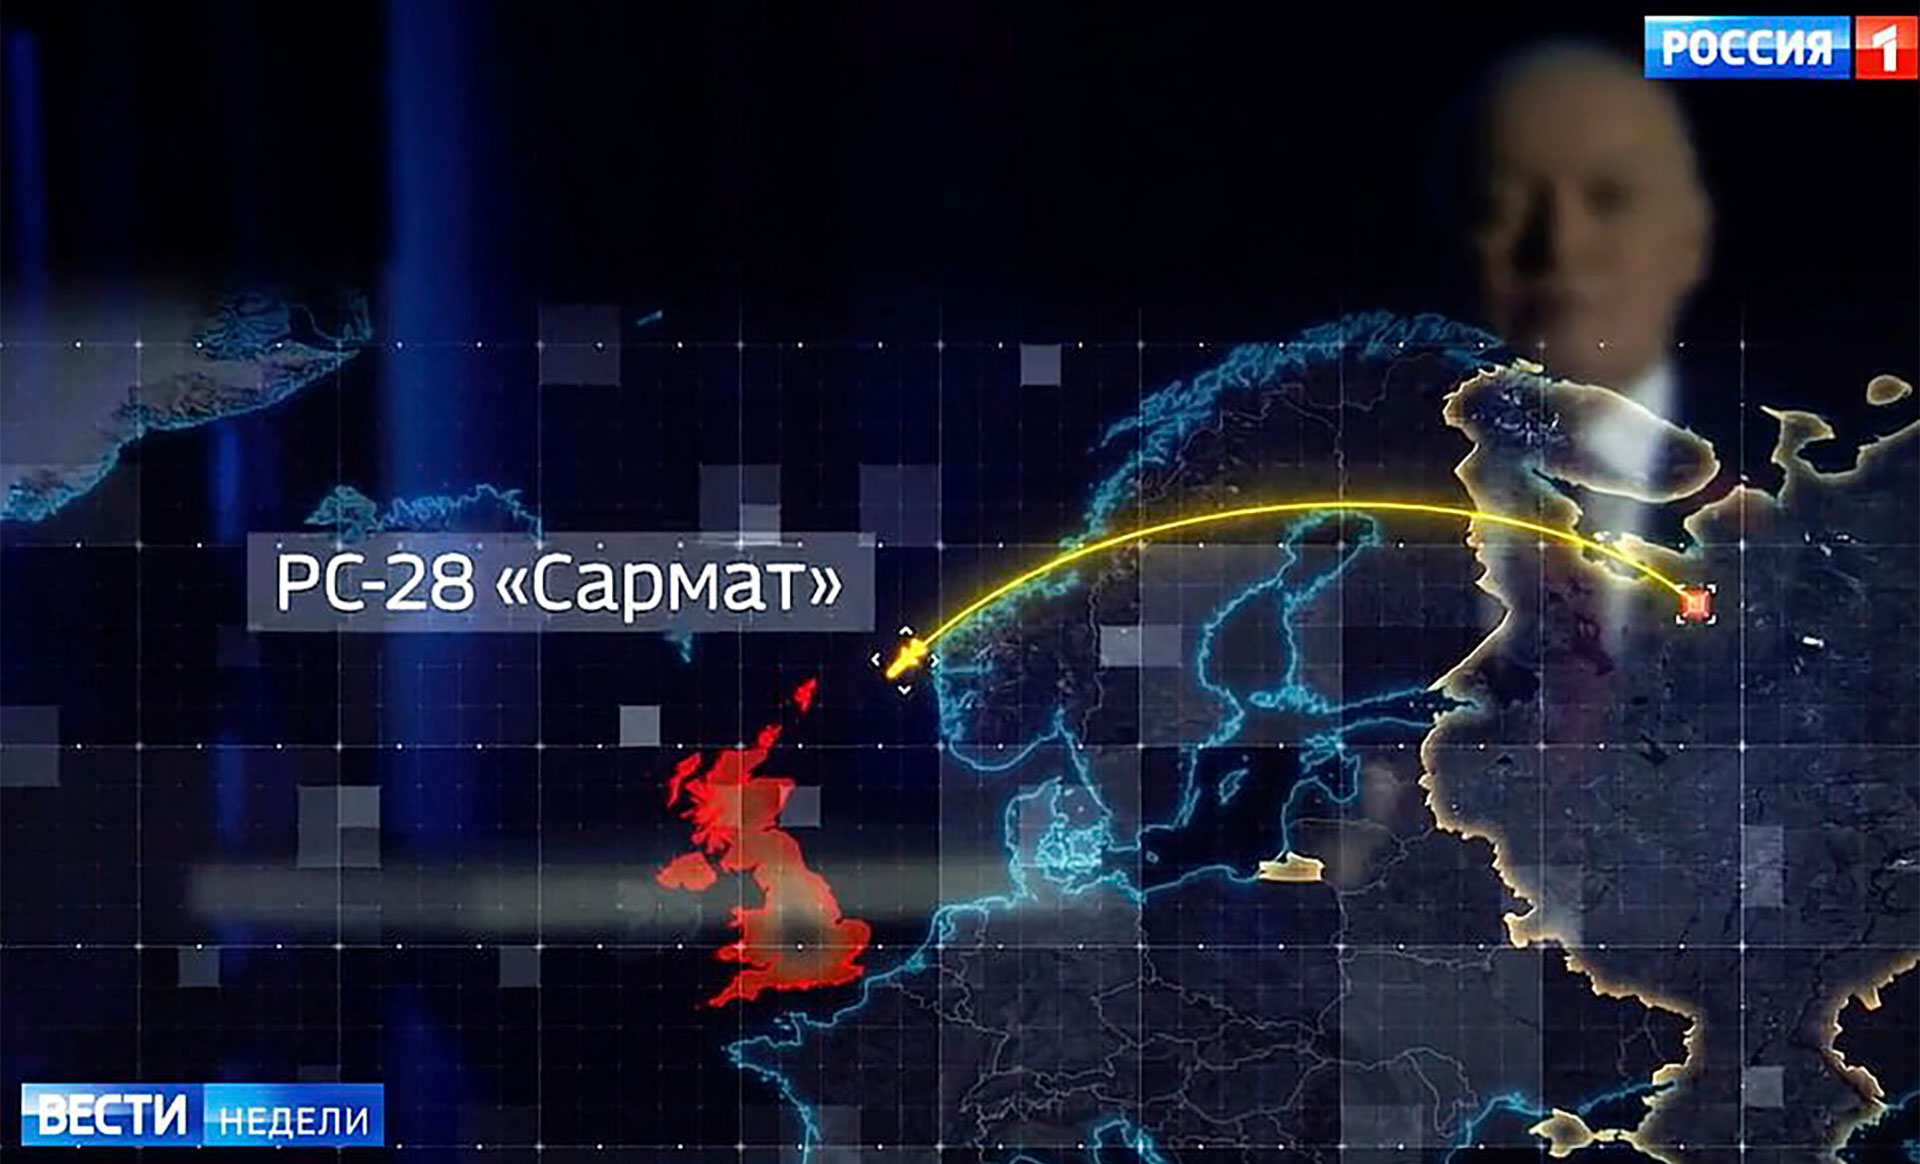 Russian state television showed how quickly Putin's Satan-2 nuclear missile could reach British shores